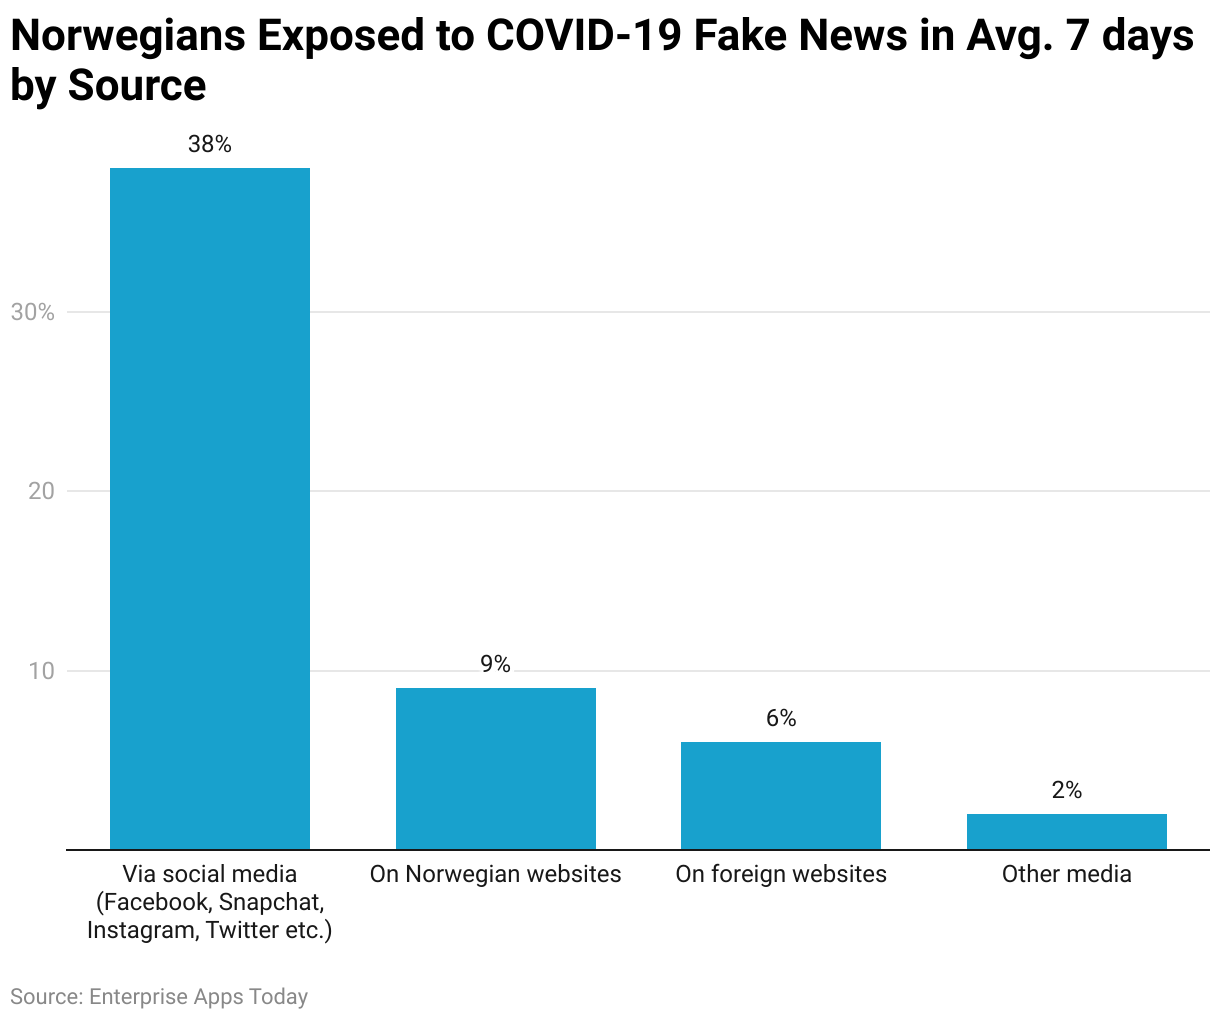 Norwegians Exposed to COVID-19 Fake News in Past Week by Source